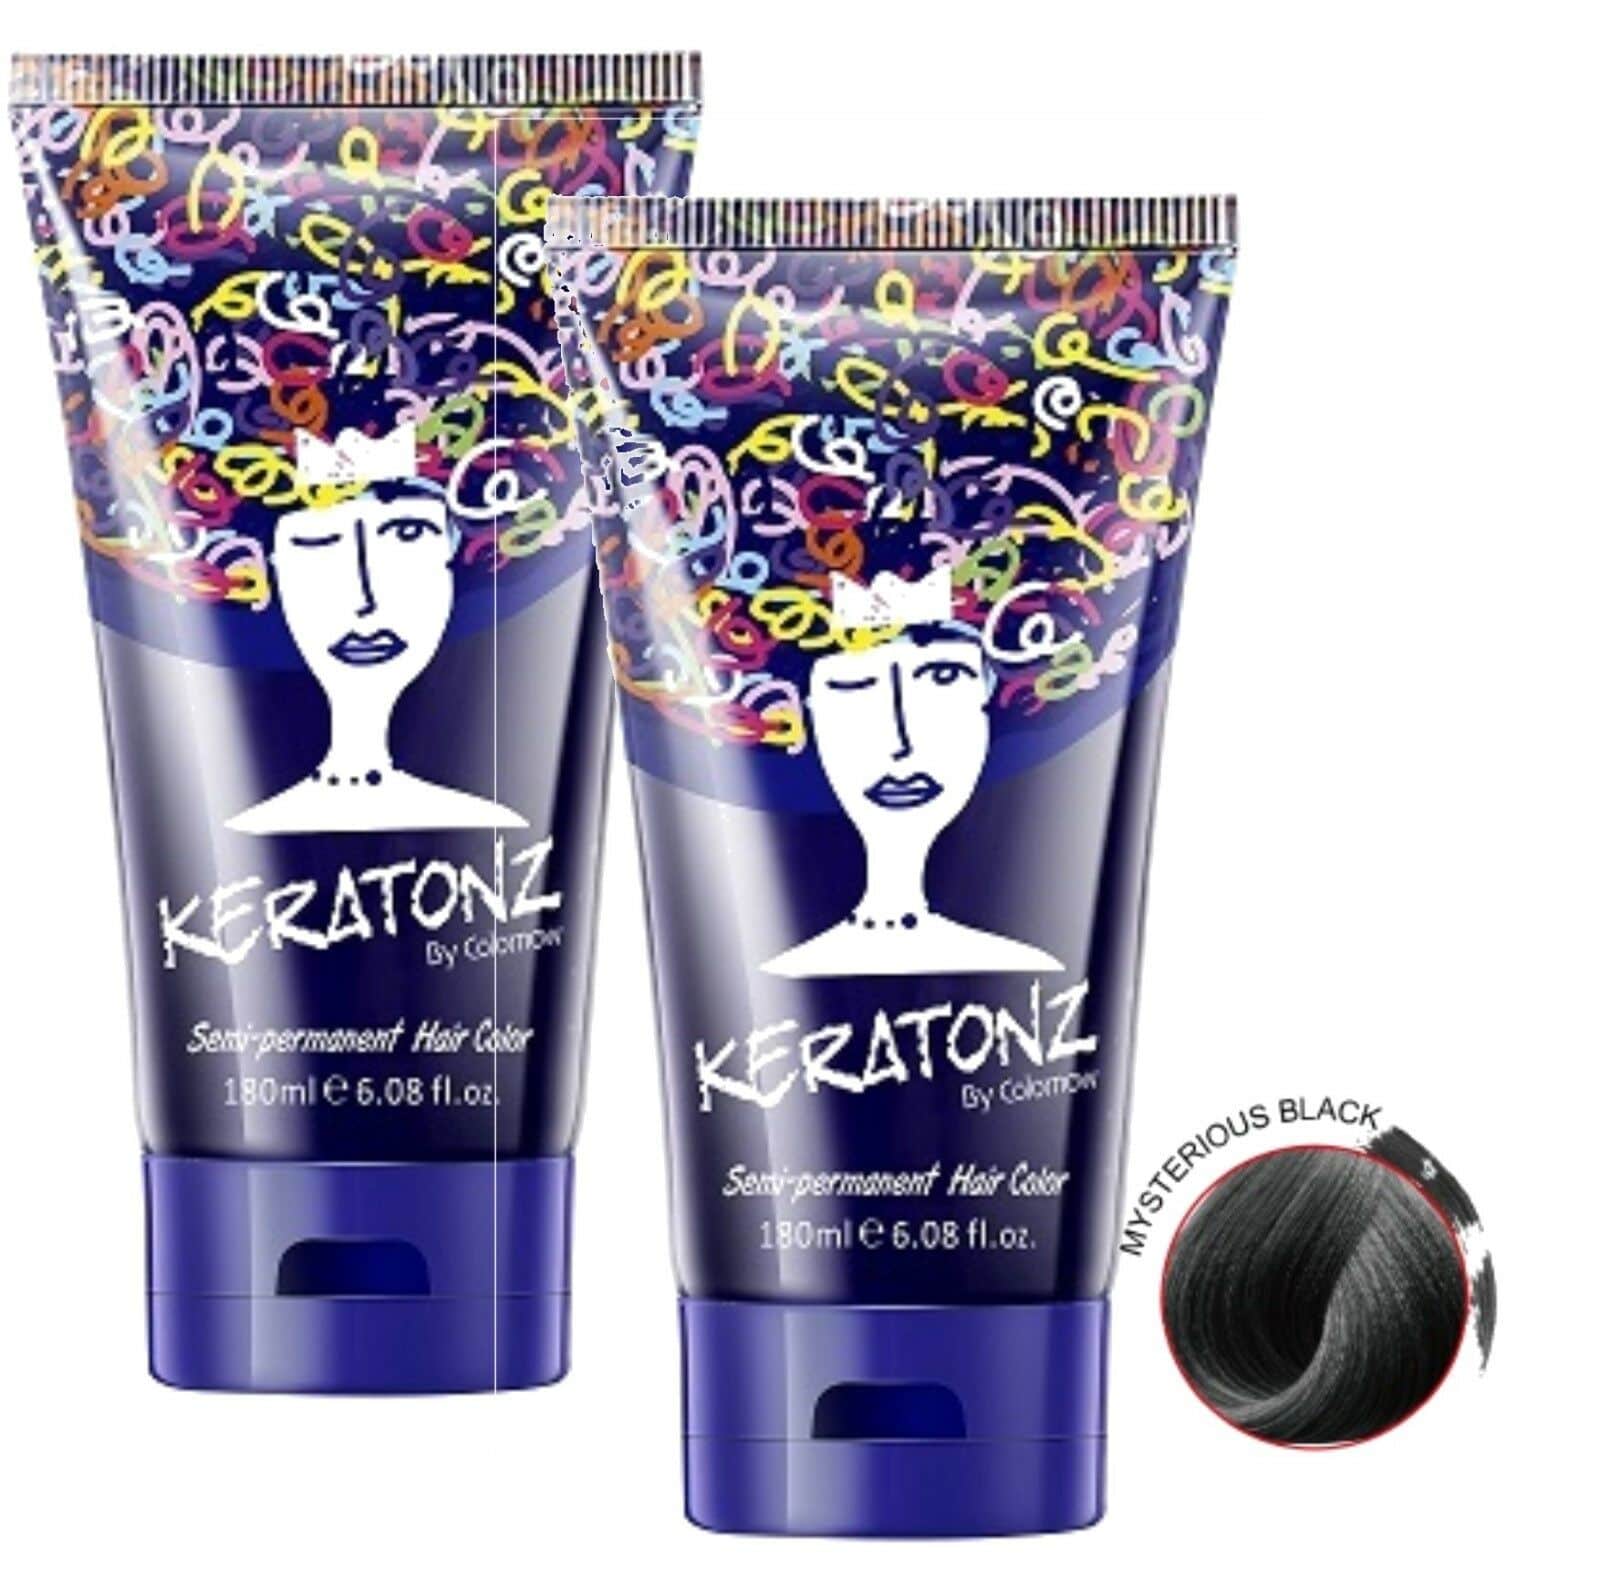 Keratonz Semi Permanent Color by Colornow 180ml x 2 Mysterious Black - On Line Hair Depot